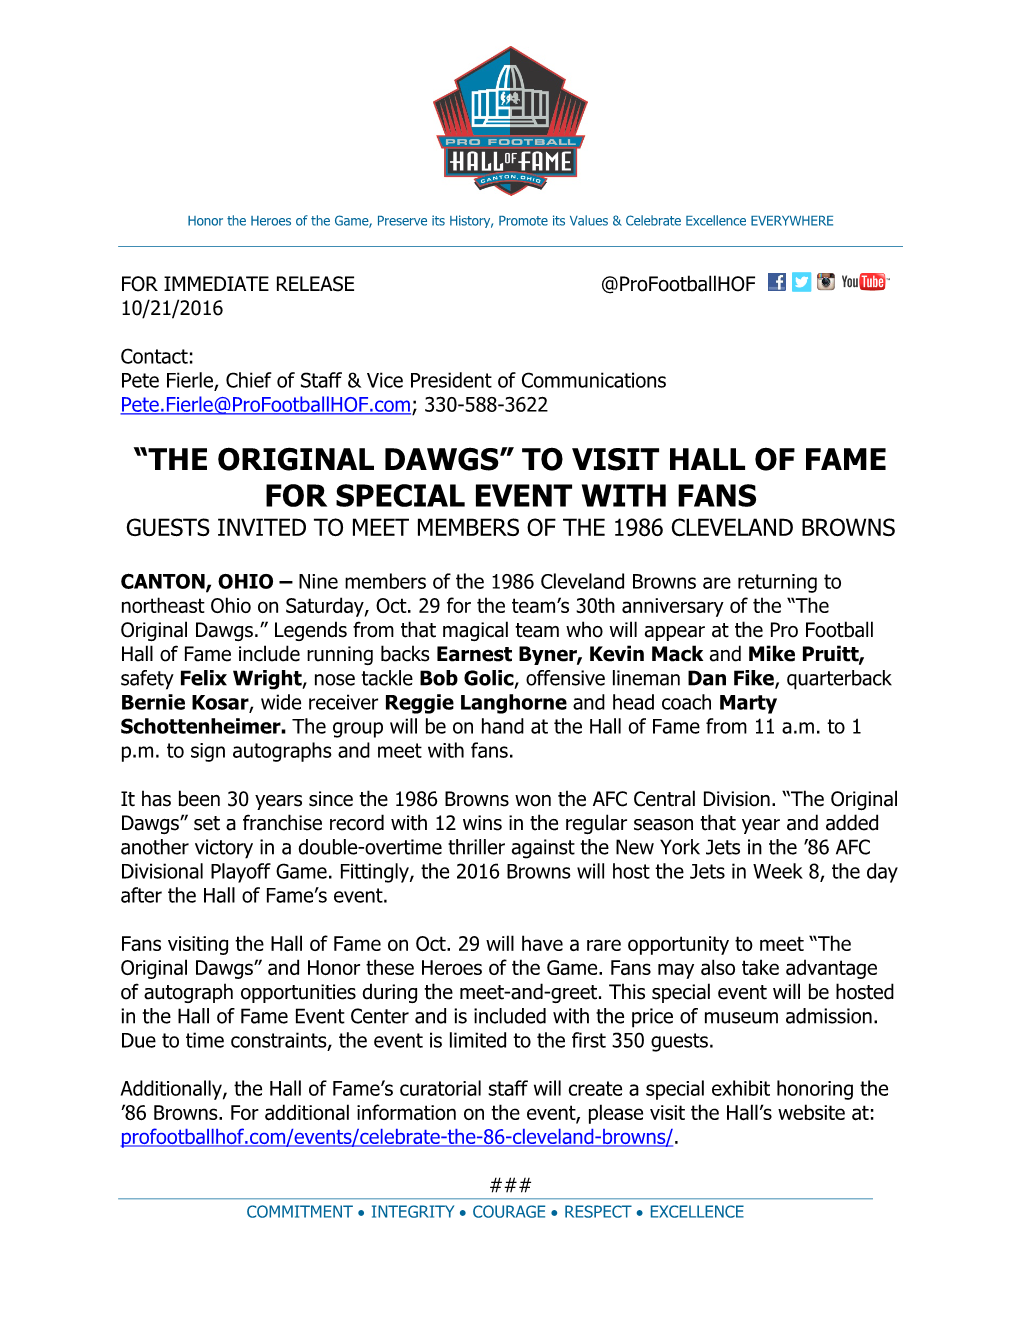 The Original Dawgs” to Visit Hall of Fame for Special Event with Fans Guests Invited to Meet Members of the 1986 Cleveland Browns